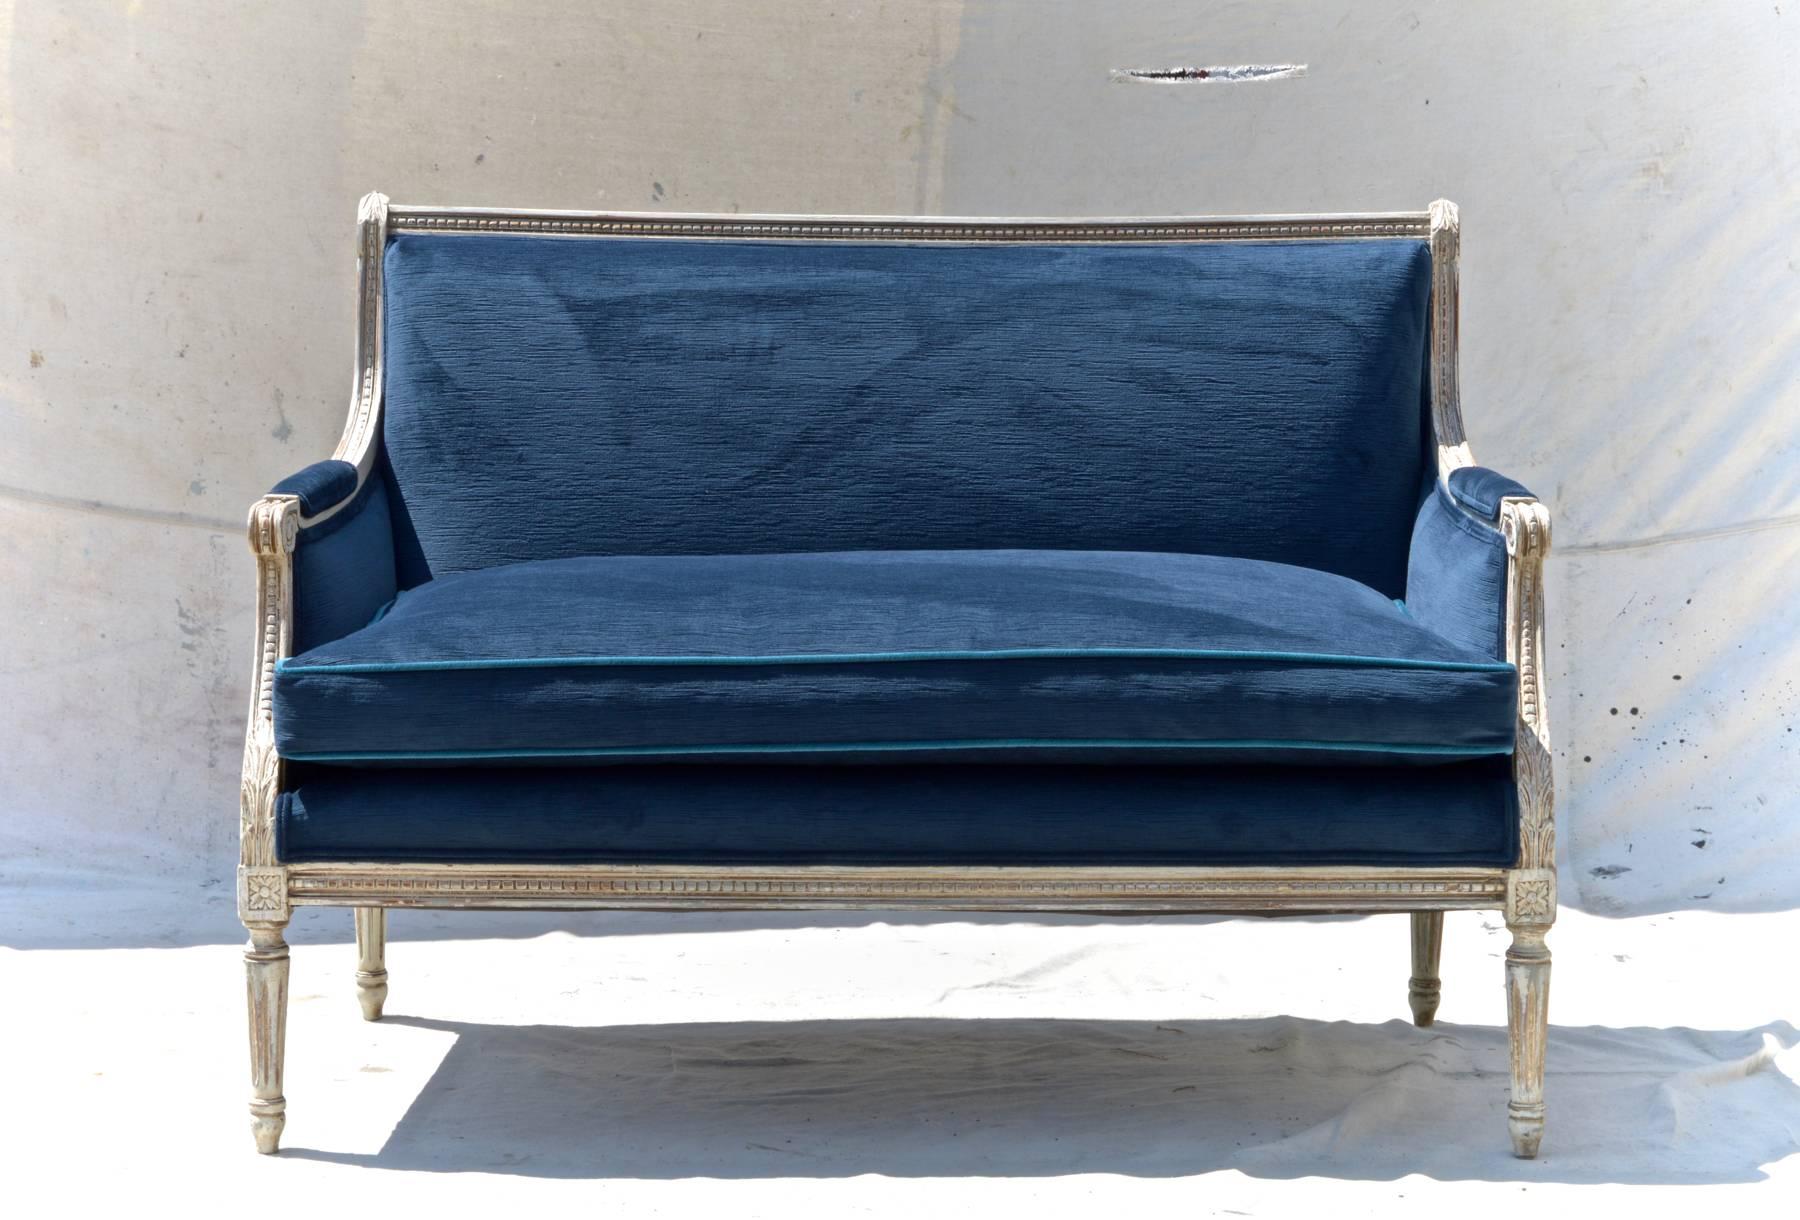 A stunning pair of Louis XVI style settees in navy velvet. Custom finished grey frames support plush and reconditioned single long down cushions on each love seat. Cushions are outfitted with a subtle contrasting pipping in peacock velvet.
The look